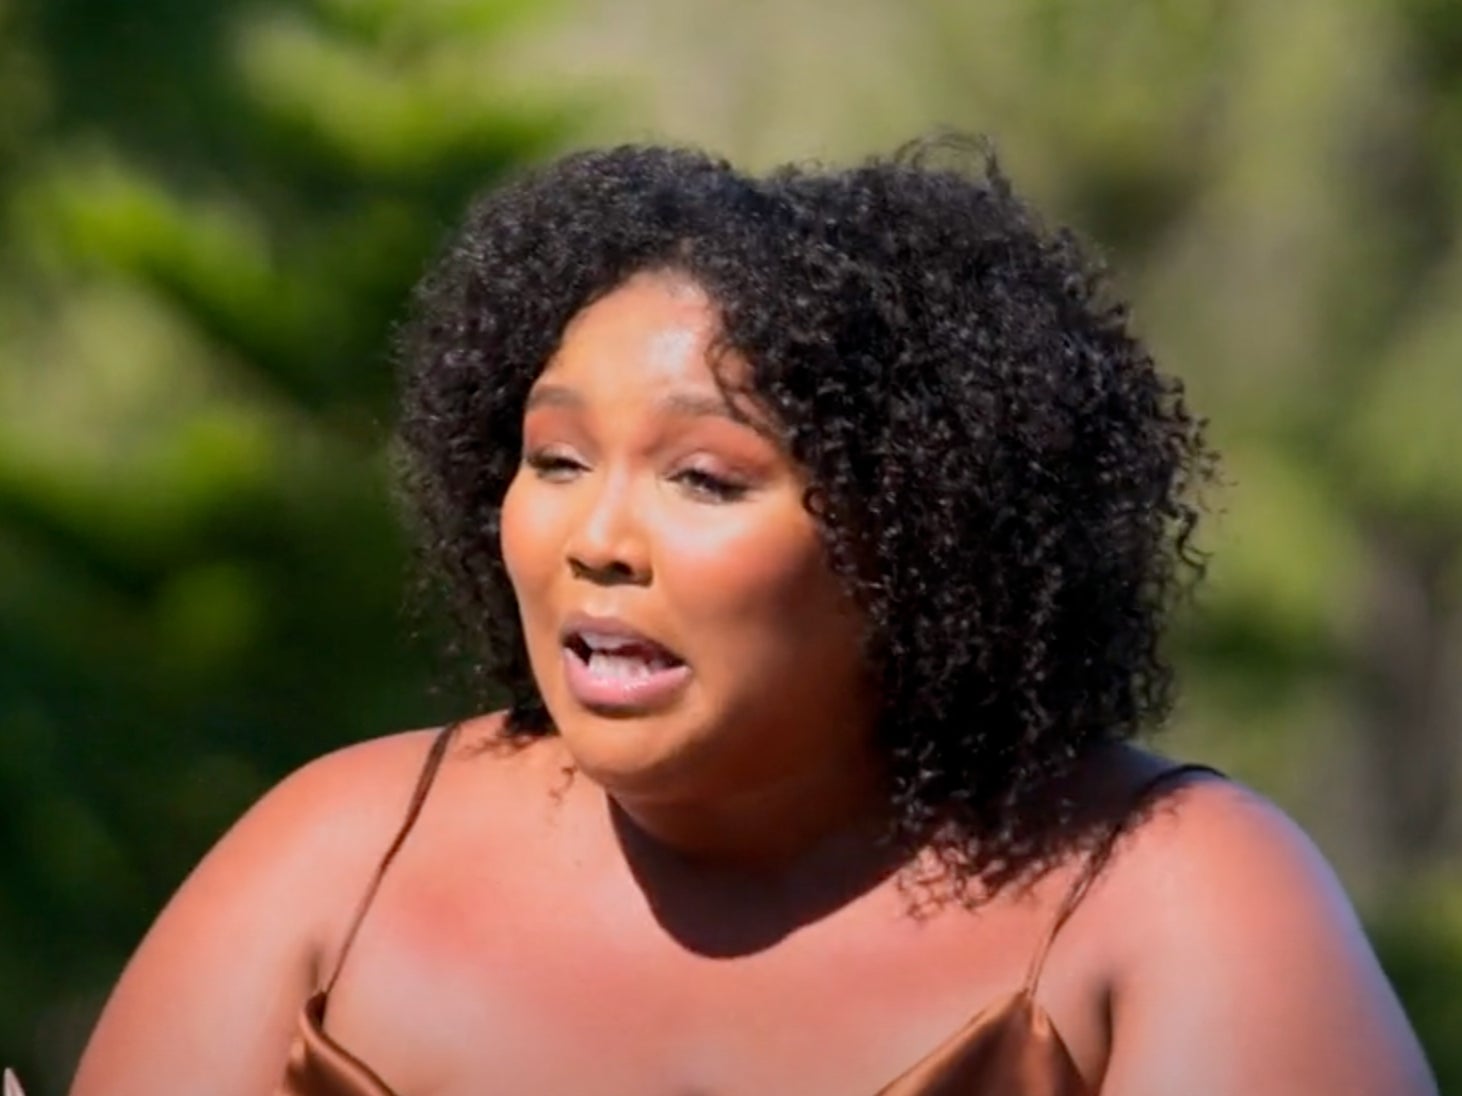 Lizzo tasked ‘Watch Out for the Big Grrrls’ competitors with posing nude – but some were not some comfortable